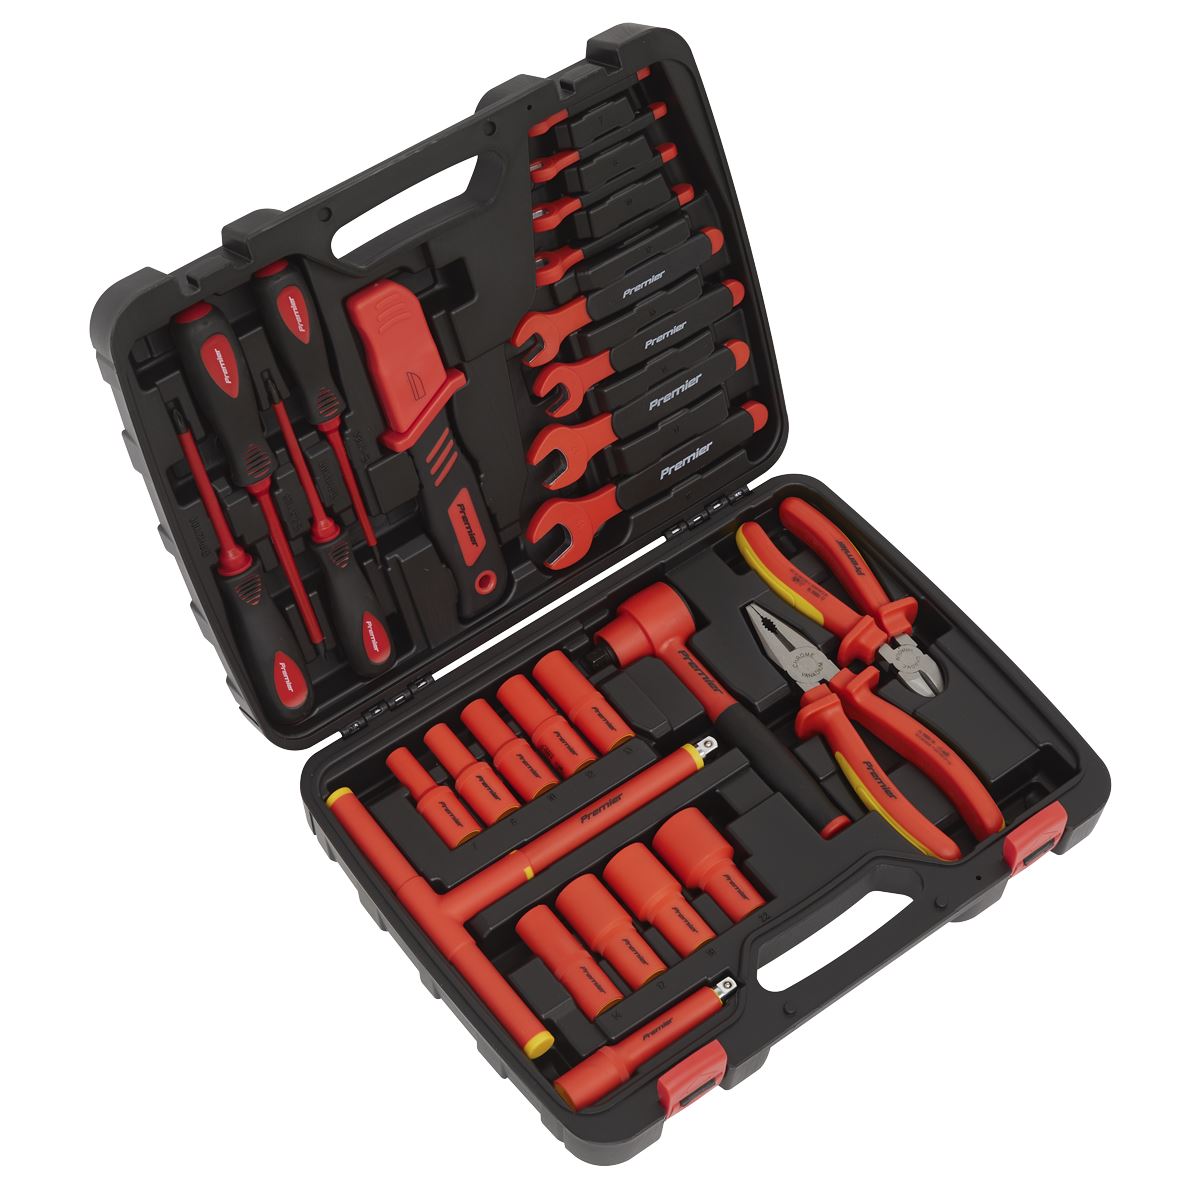 Sealey Premier 1000V Insulated Tool Kit 27pc - VDE Approved